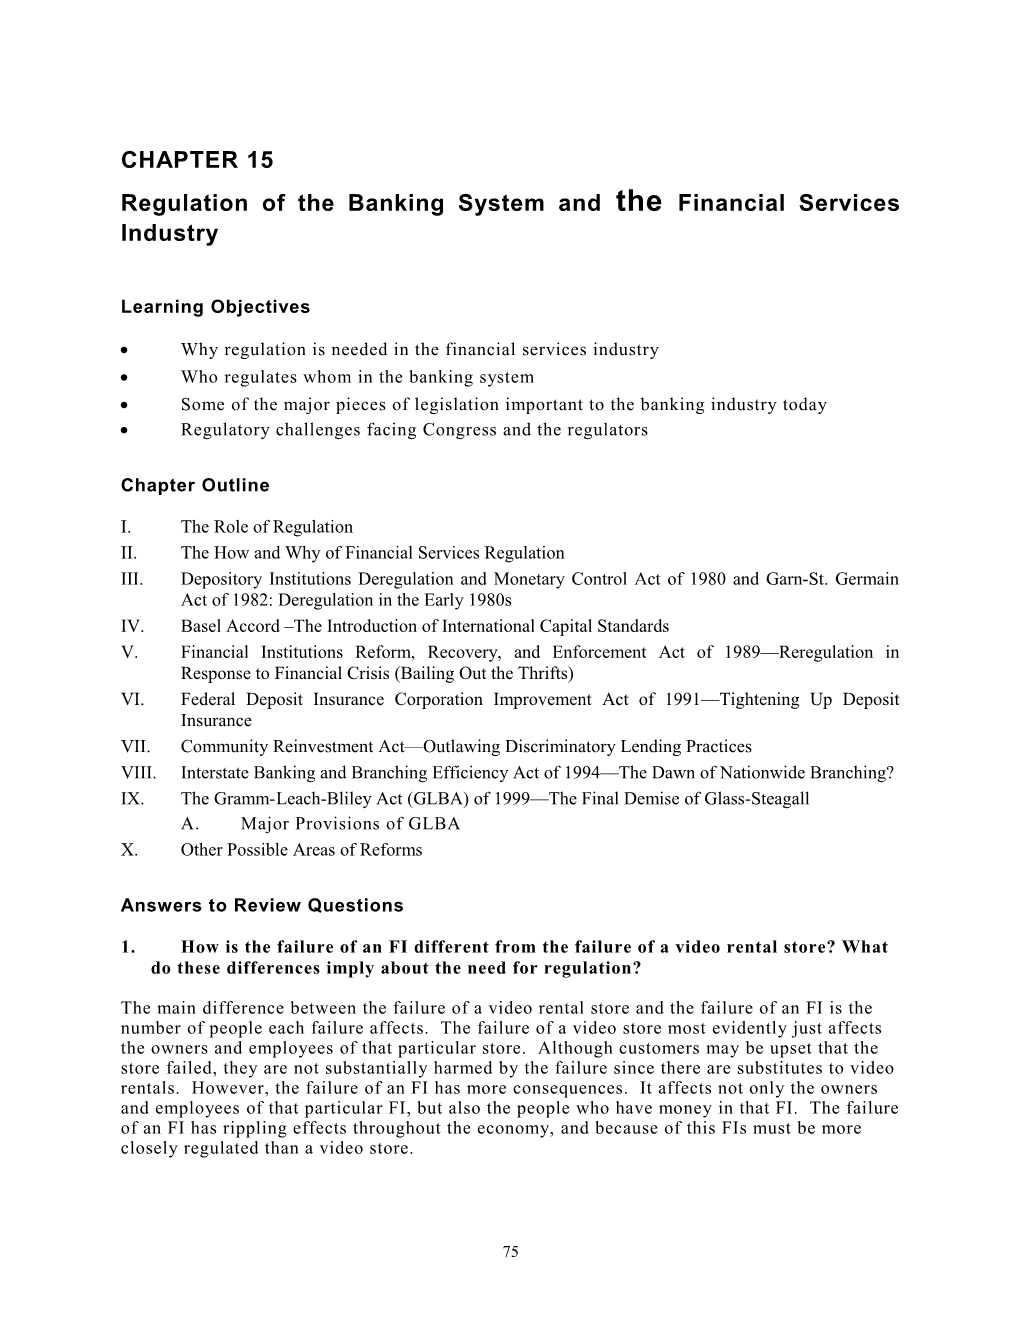 Regulation of the Banking System and the Financial Services Industry